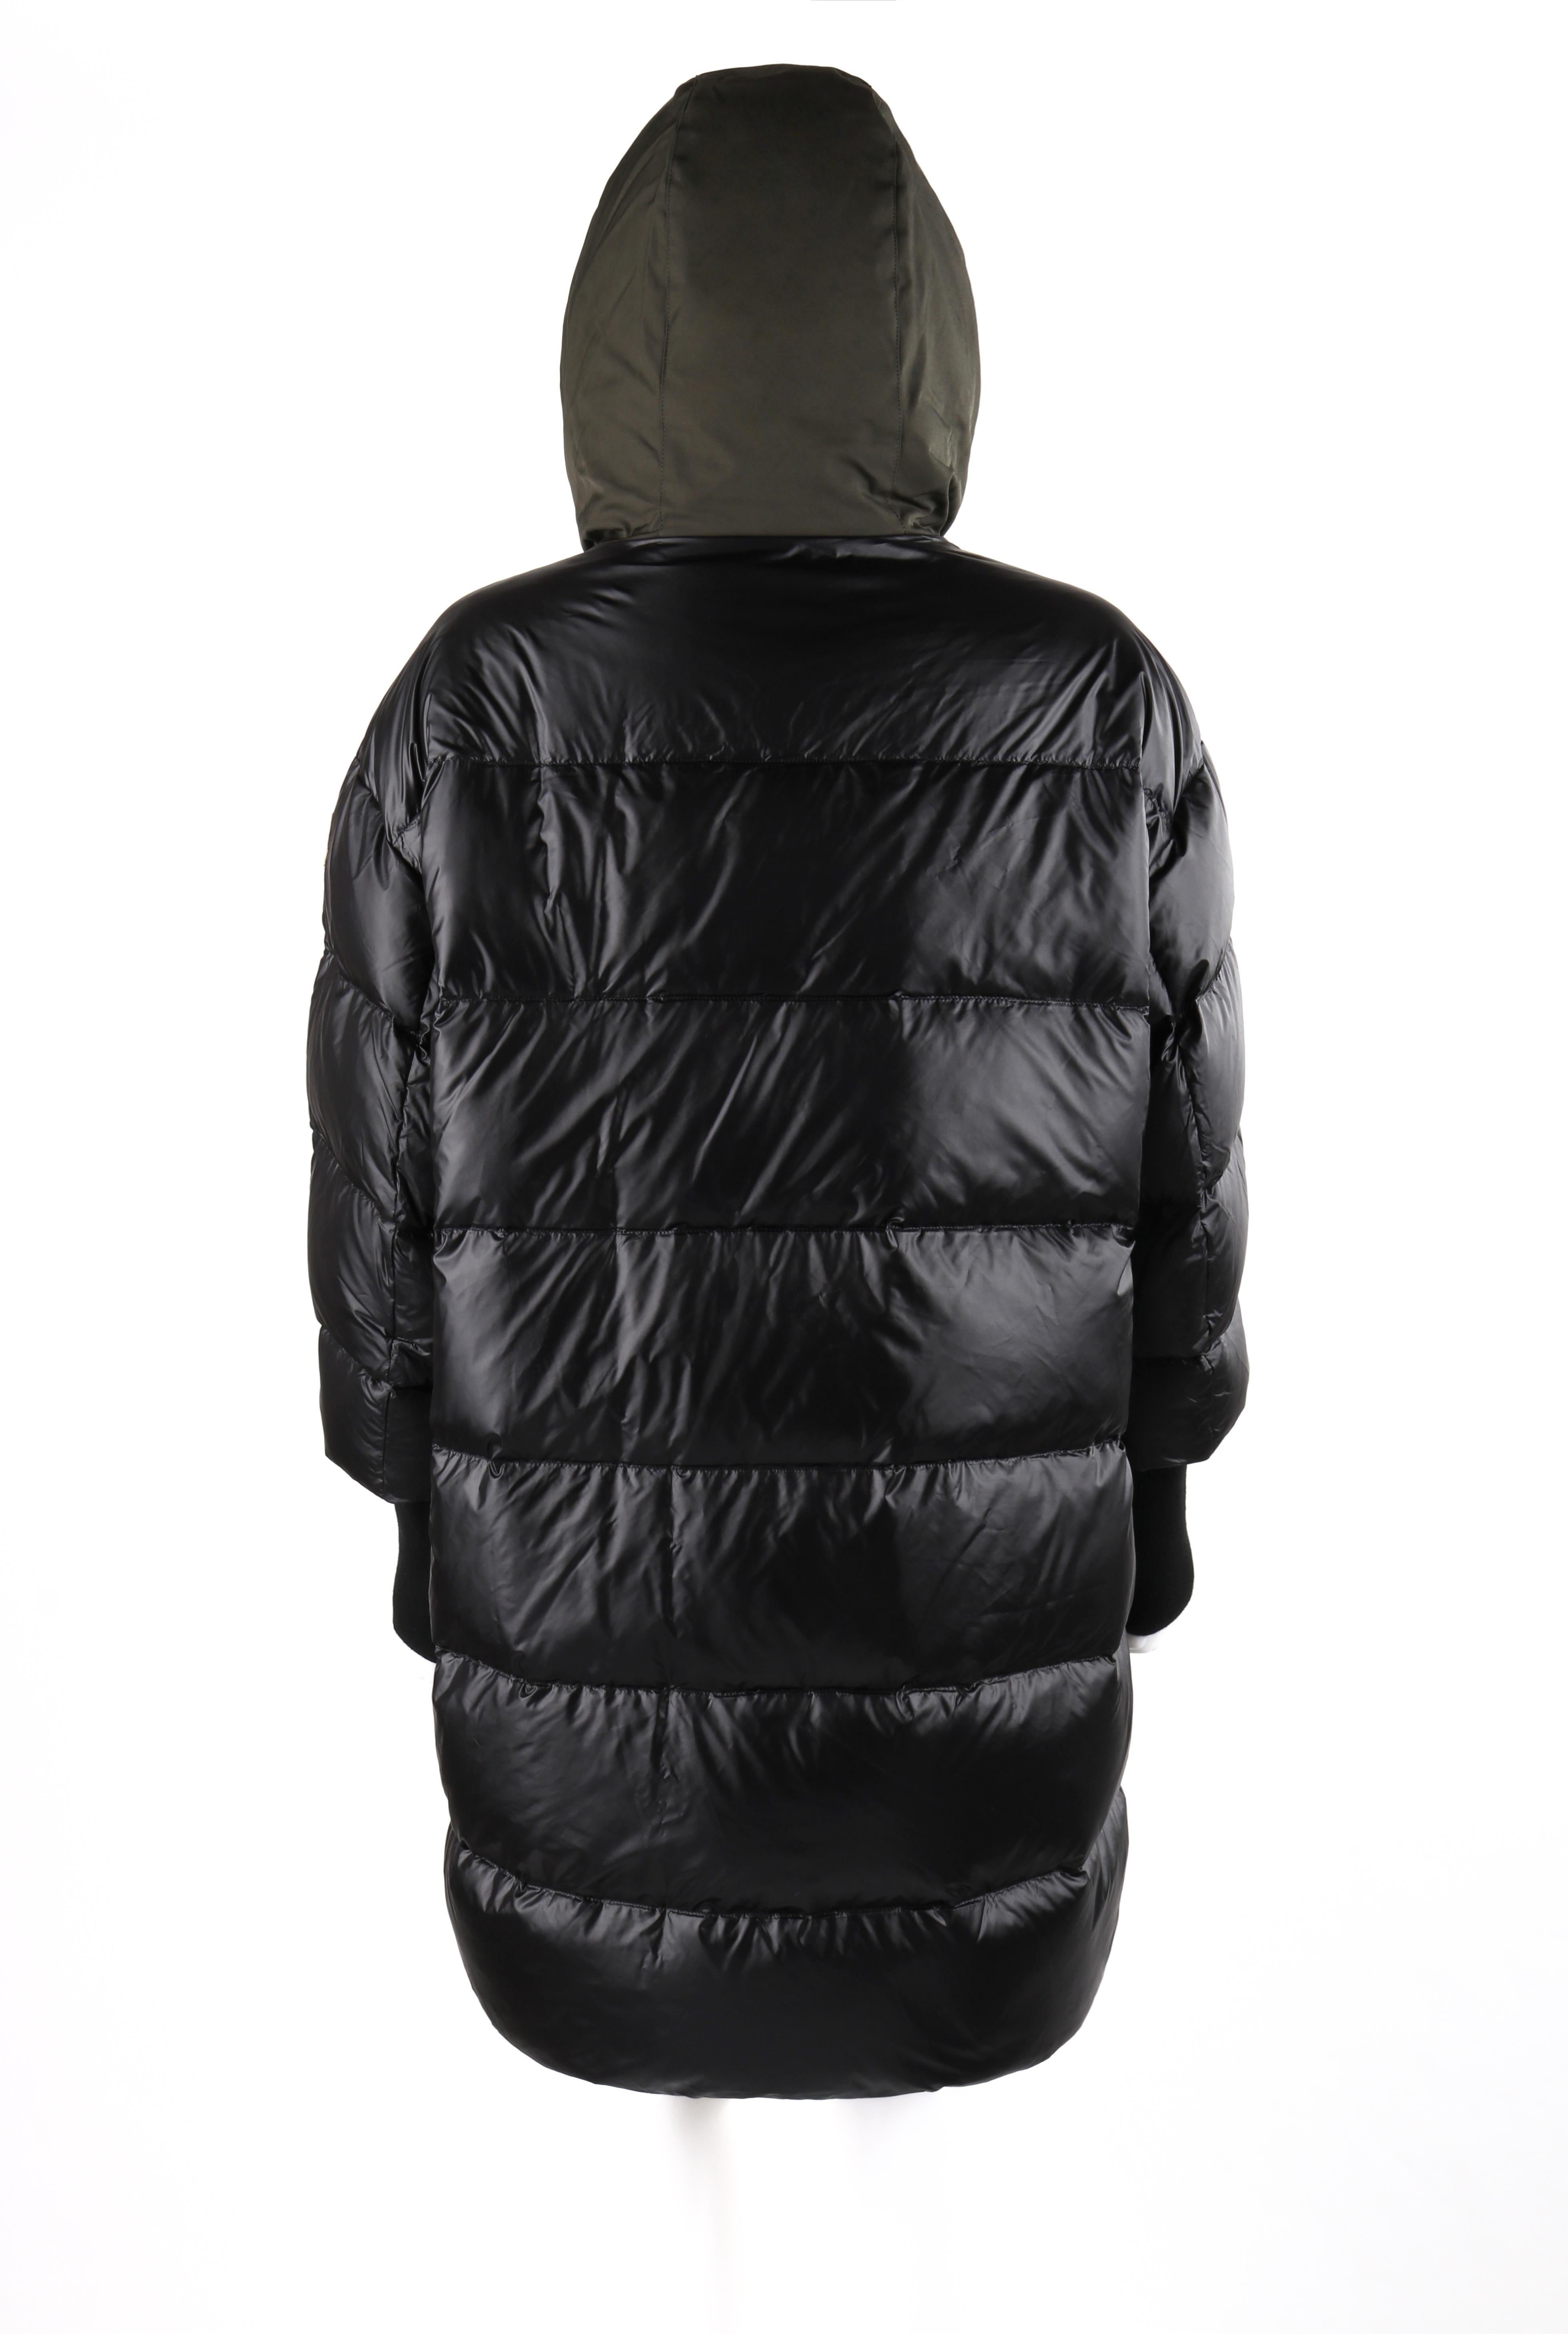 MONCLER F/W 2018 “Ocean Giubbotto” Olive Black Puffer Layer Belted Hooded Jacket For Sale 1